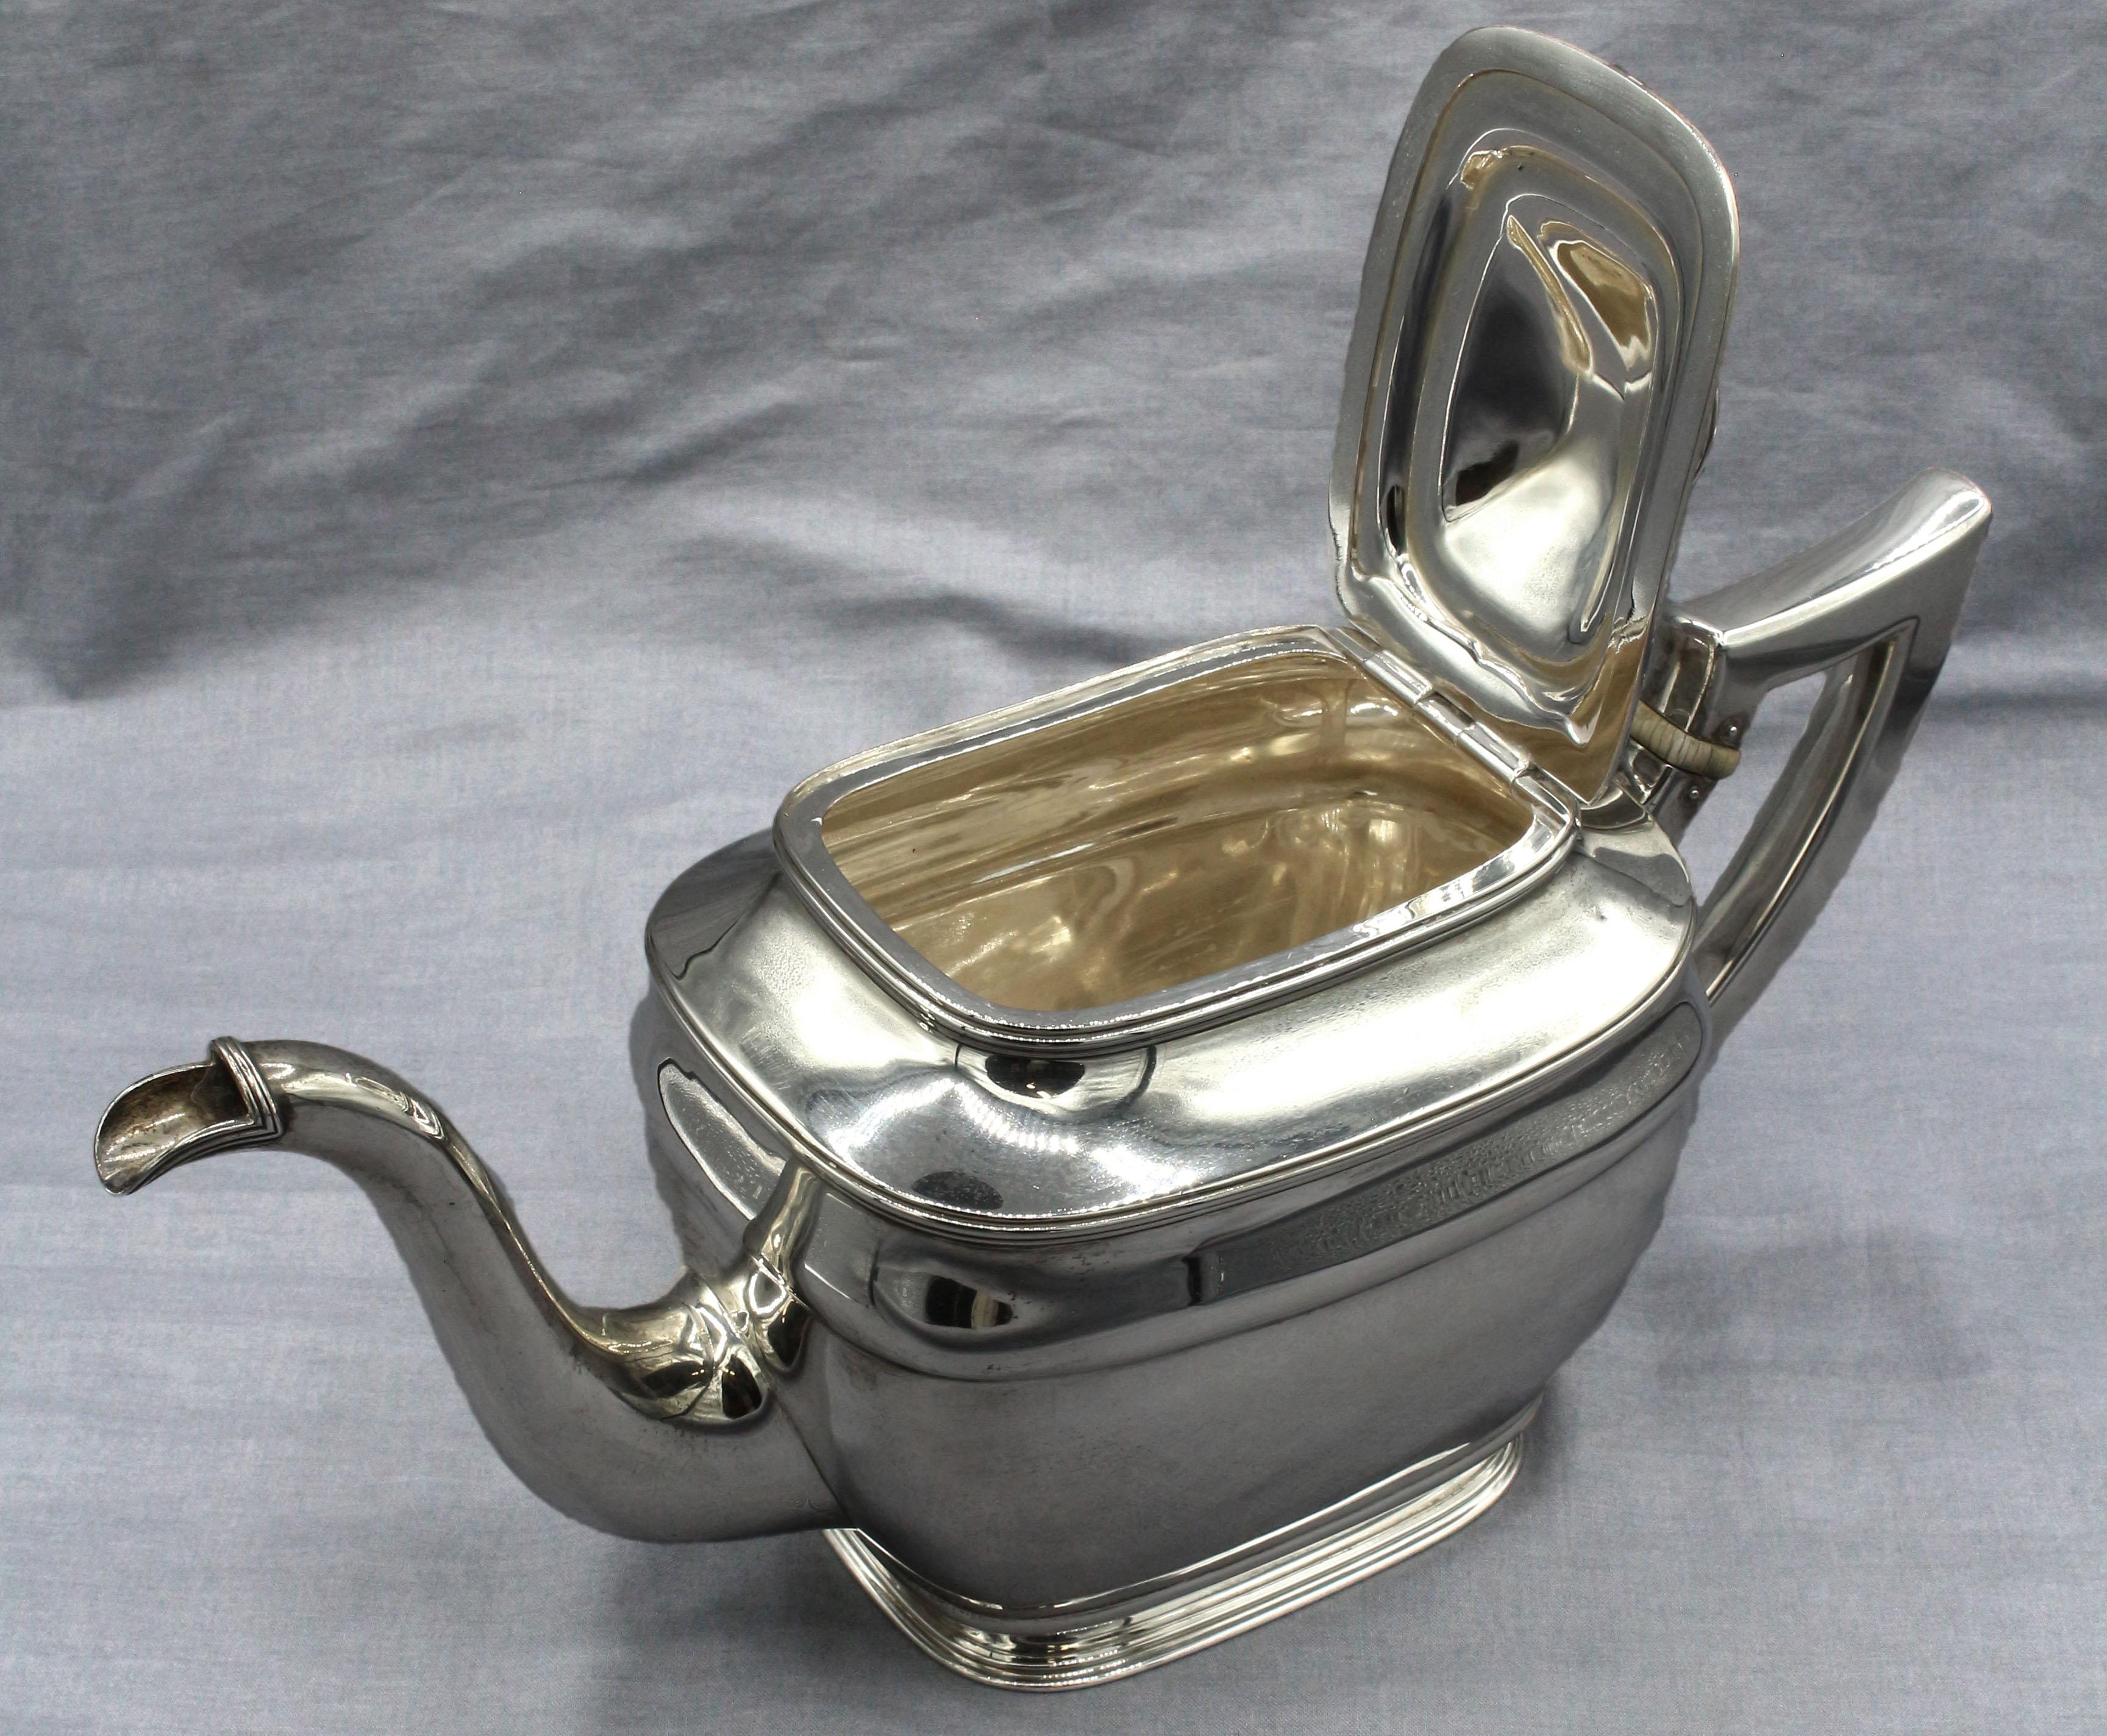 American Sterling Silver 3-Piece Tea Set by Towle, circa 1900-30